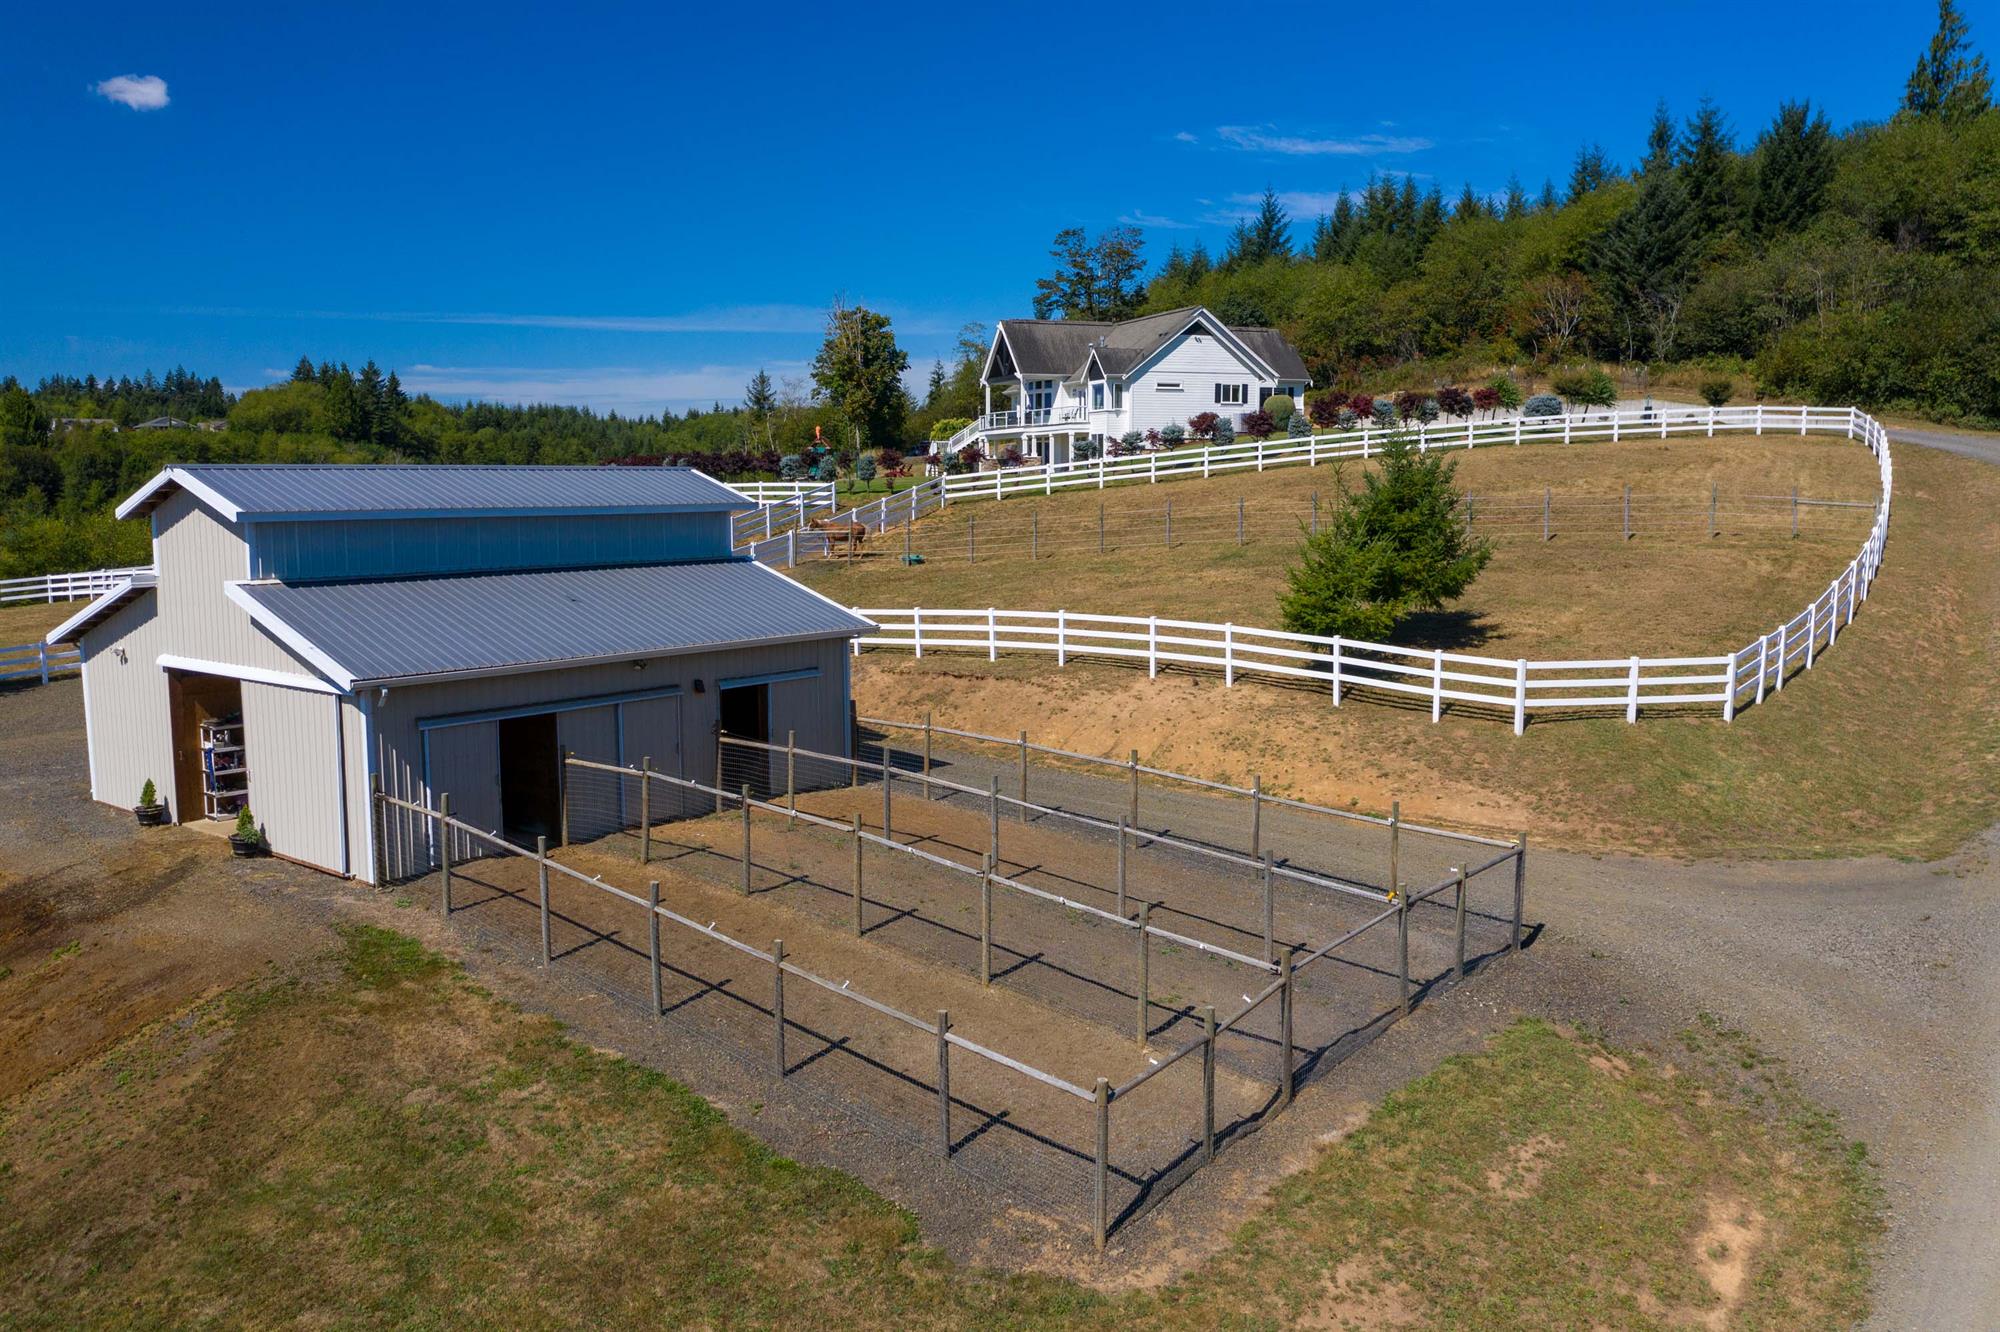 Fully insulated 36' x 36' show barn with three stalls, each with its own run
